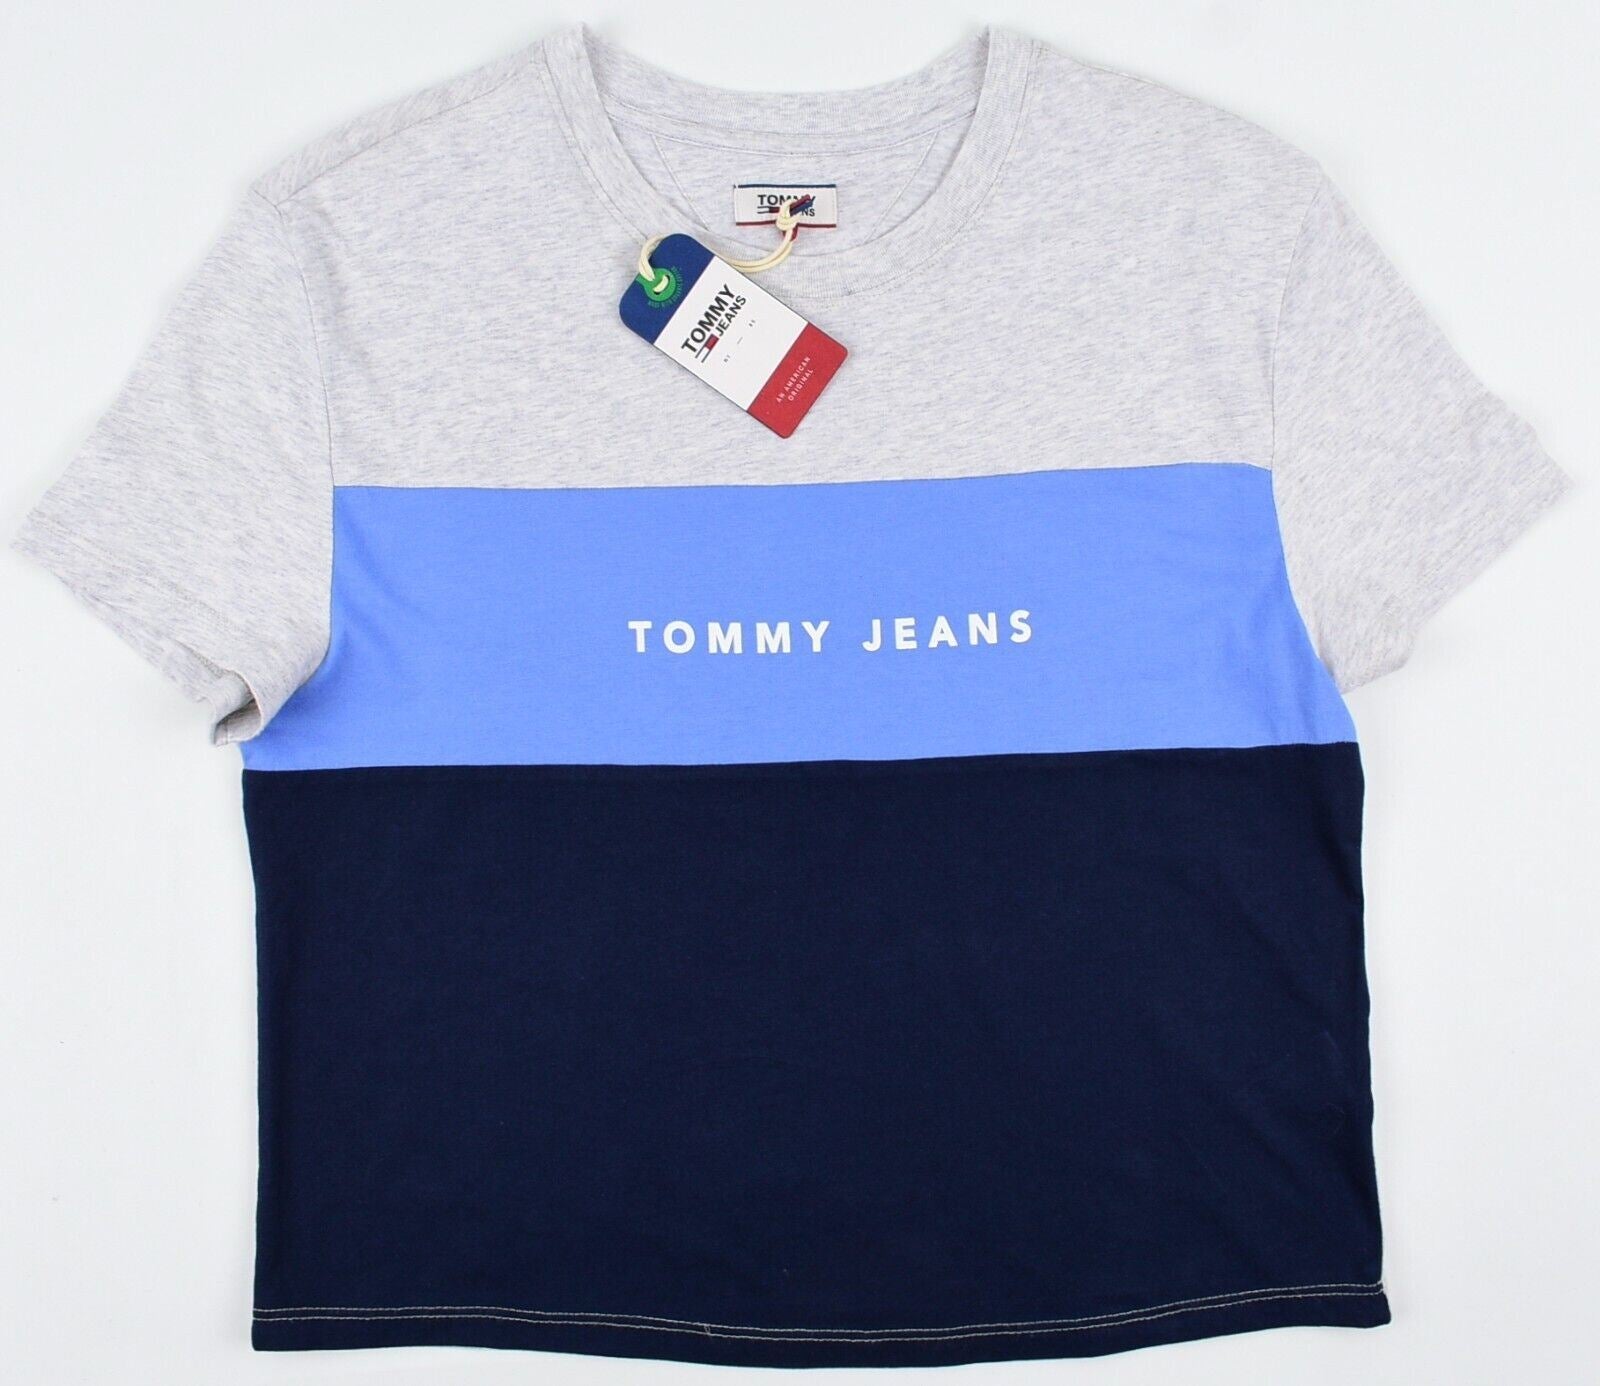 TOMMY HILFIGER - TOMMY JEANS Women's Cropped Tee, Multicoloured/Striped, size XS